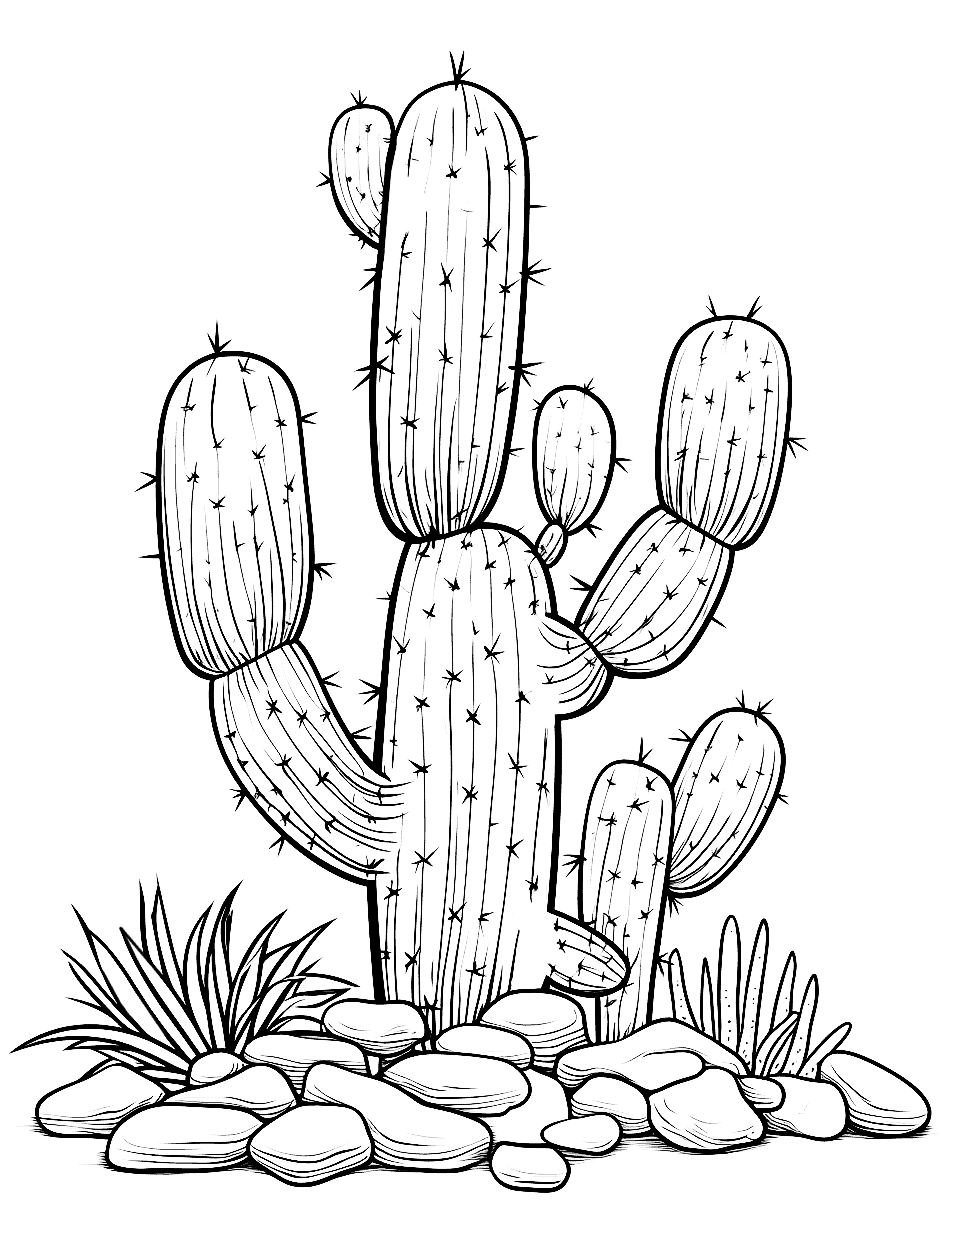 Cactus with Desert Rocks Coloring Page - A cactus surrounded by interestingly shaped desert rocks and pebbles.